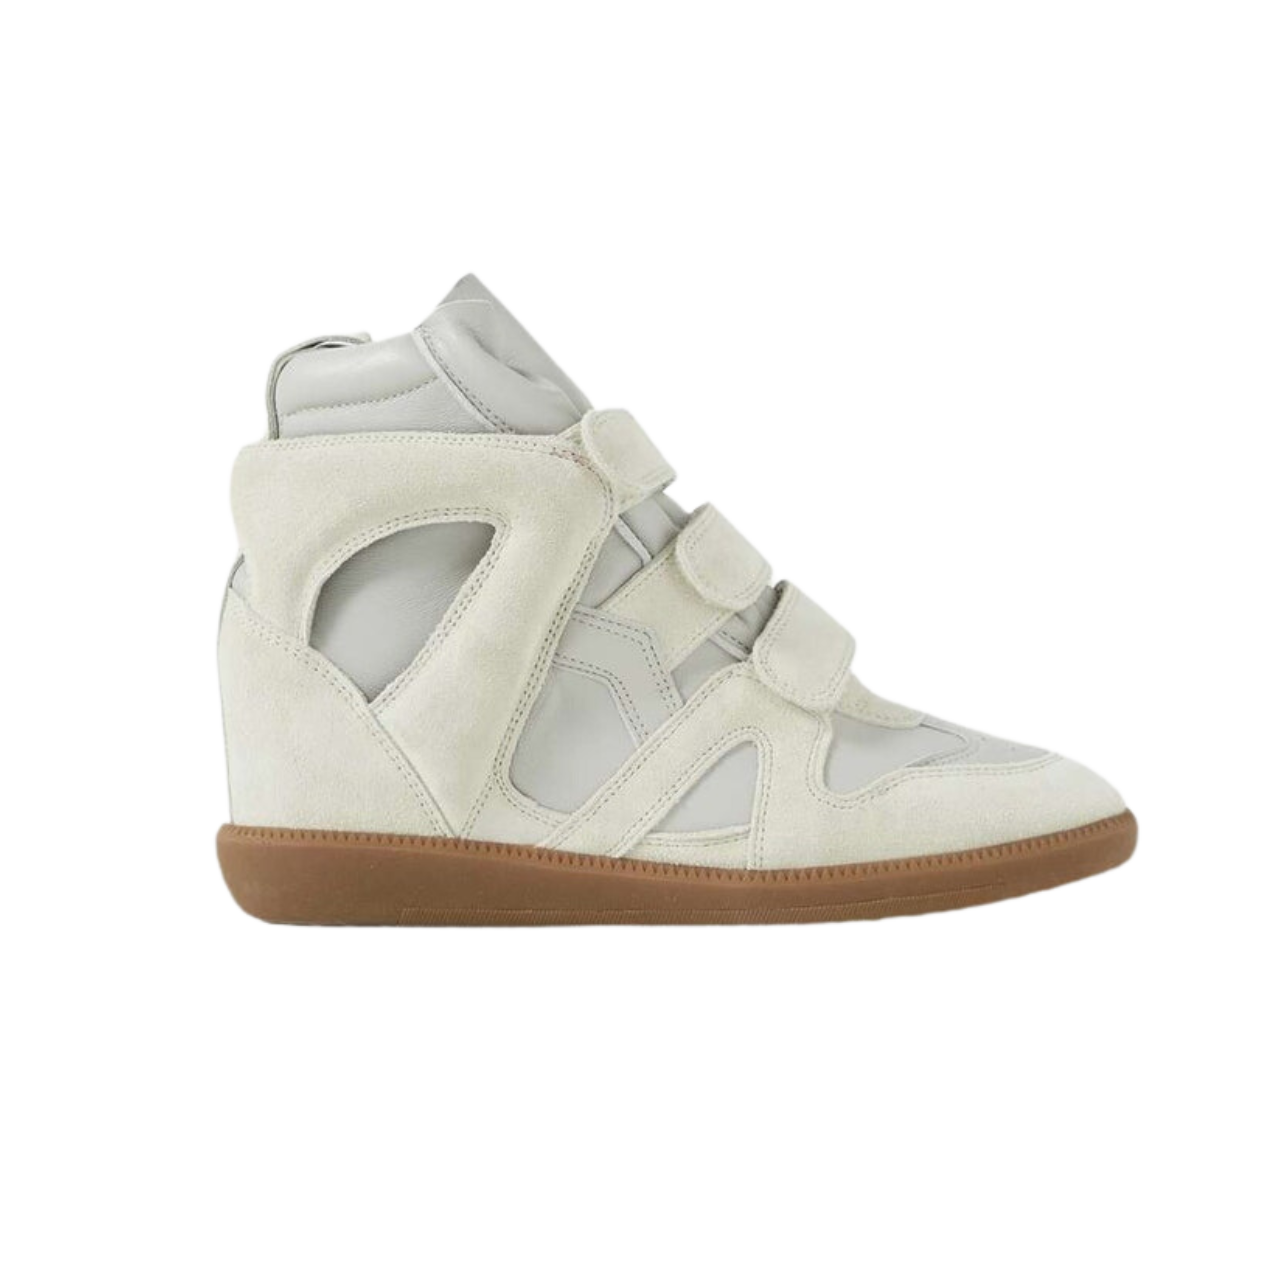 Isabel Marant Buckee suede and leather wedge sneakers